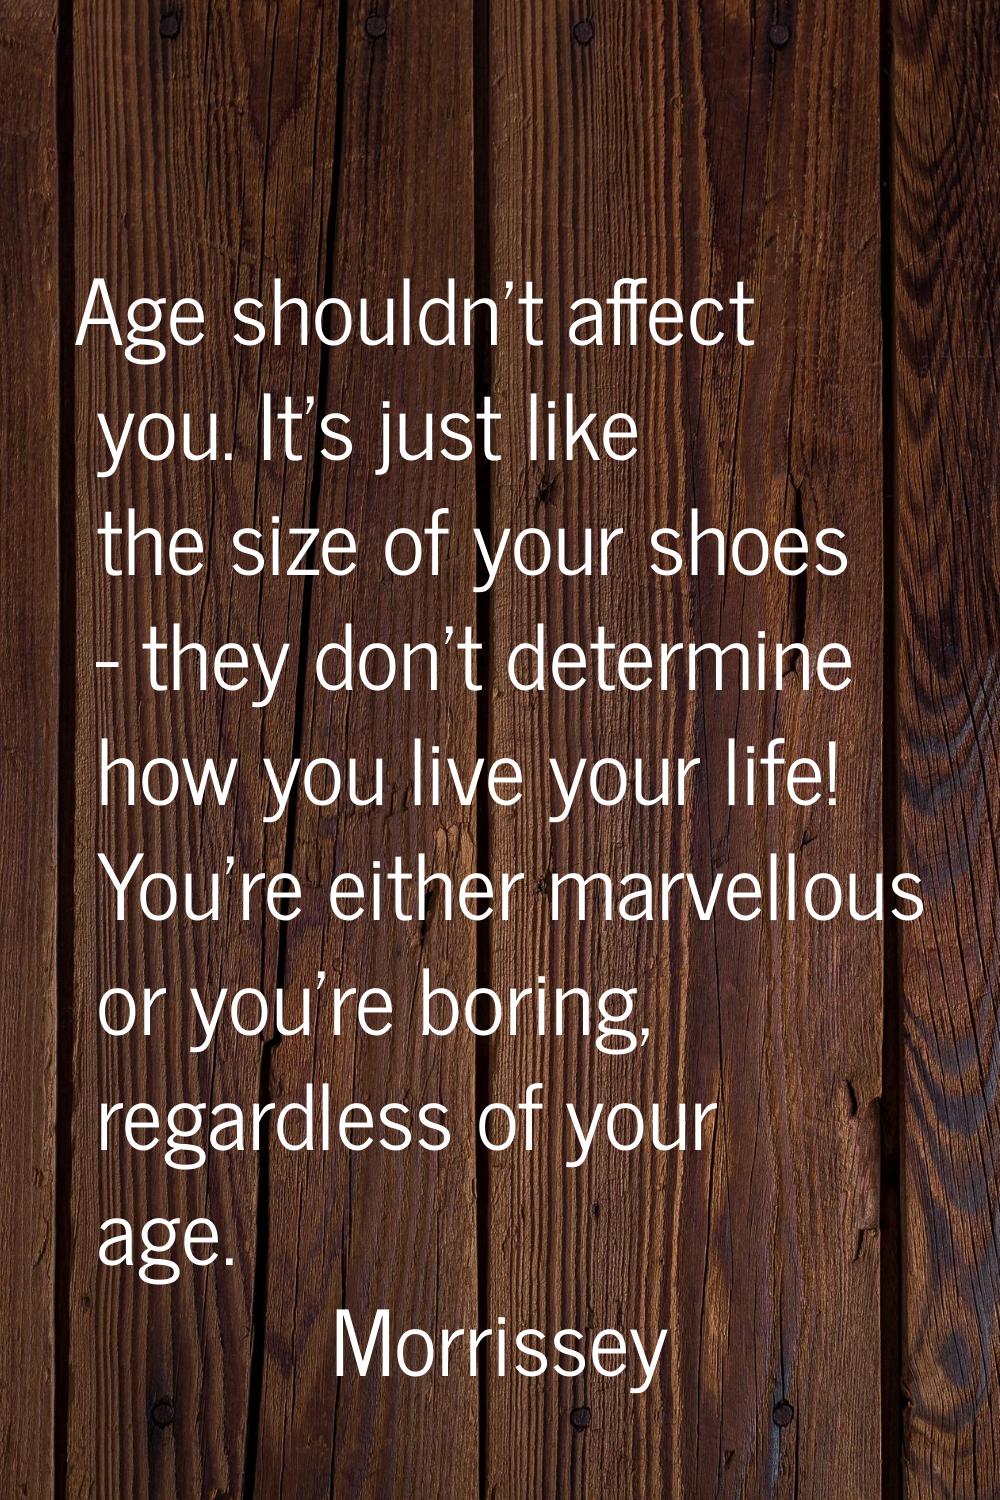 Age shouldn't affect you. It's just like the size of your shoes - they don't determine how you live